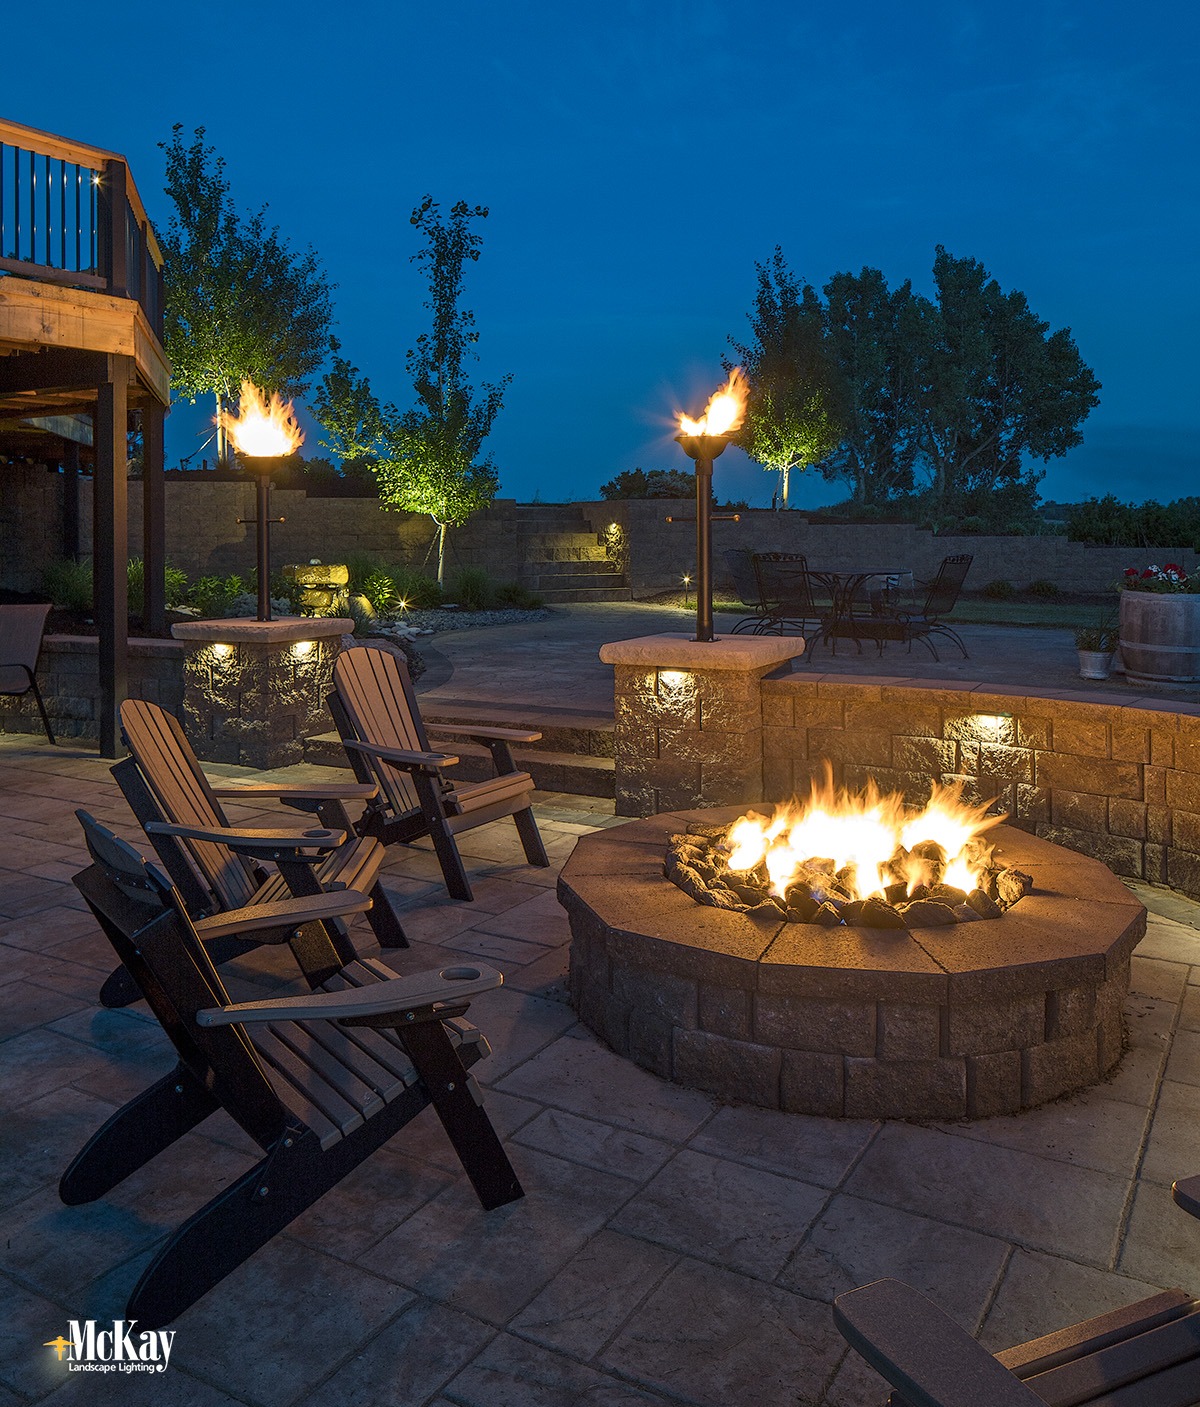 Outdoor Fire Pit Lighting Ideas And, Can I Light A Fire Pit In My Backyard